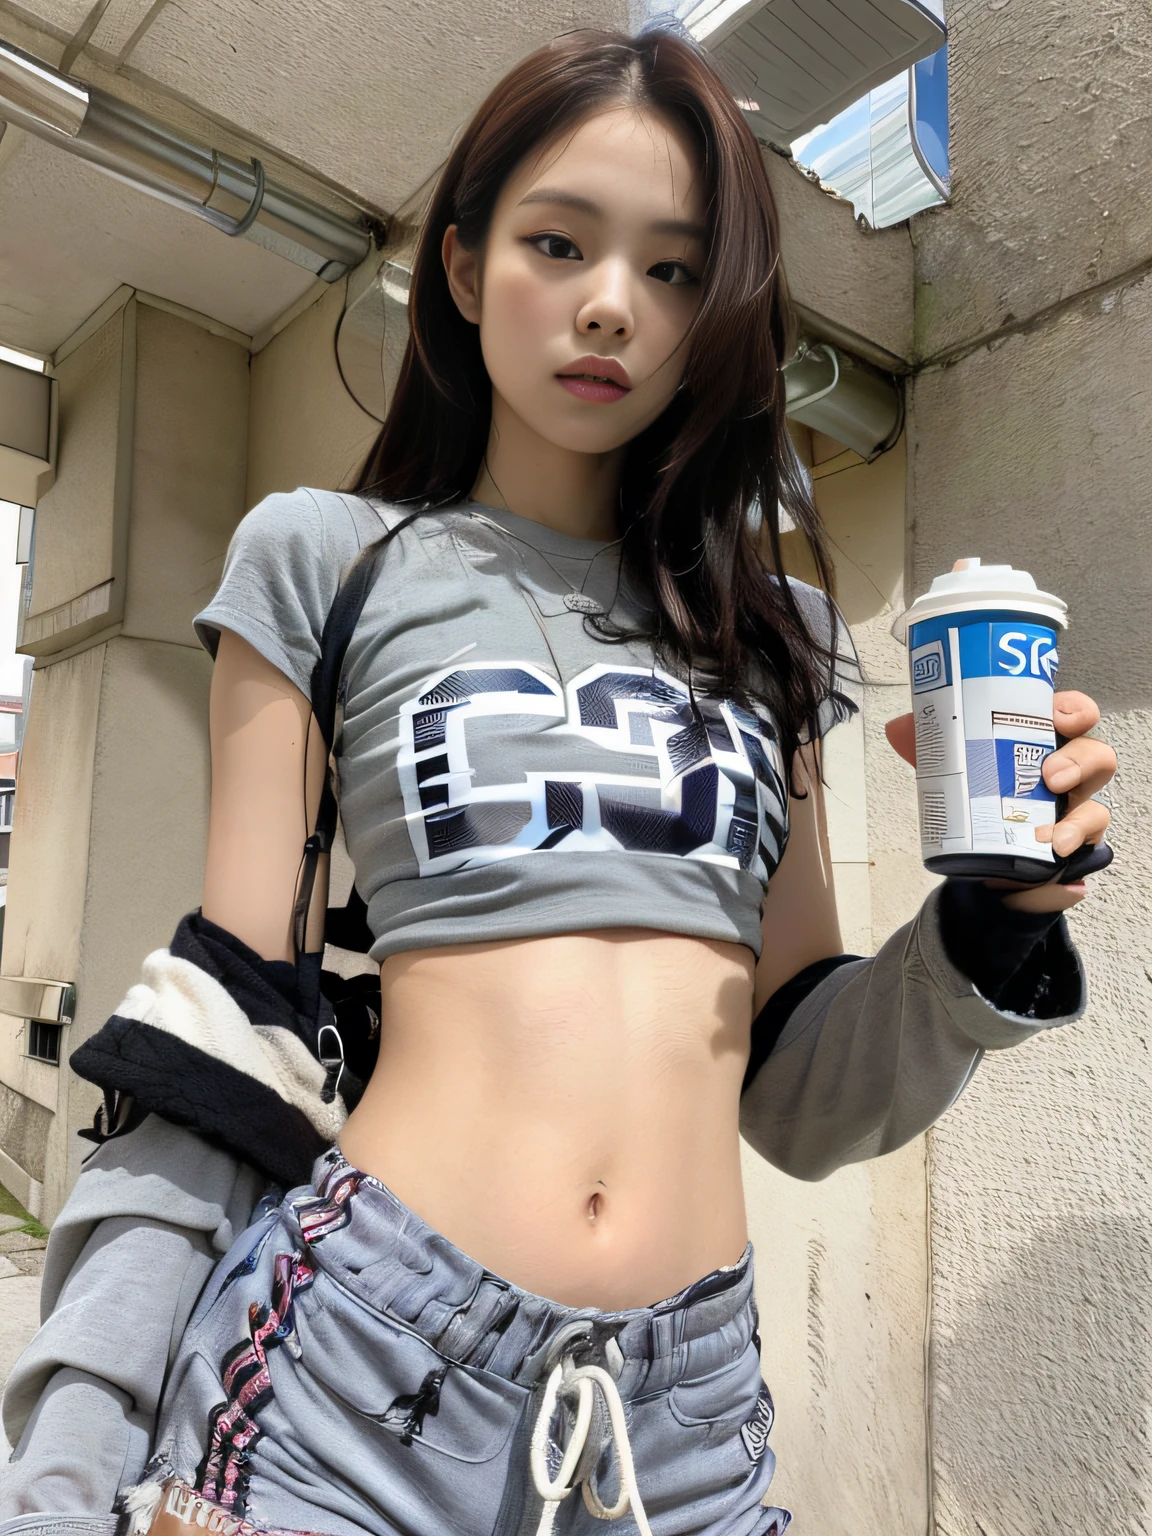 (1girl:1.3), Solo, __body-parts__, Kim Ji-ni Jennie face, wearing trendy brand, football T-shirt, thin body, bare waist, football shorts, world-weary face, cold eyes, Korean style photo photos, photographic lighting, strong contrast, sunlight on the face, world-weary face, high-class sense, cold eyes, feminine, background cement gray, 8k resolution image, intricate symmetrical details. The whole picture goes forward, mainly a woman standing all over her body, with smooth movements and a complete picture.